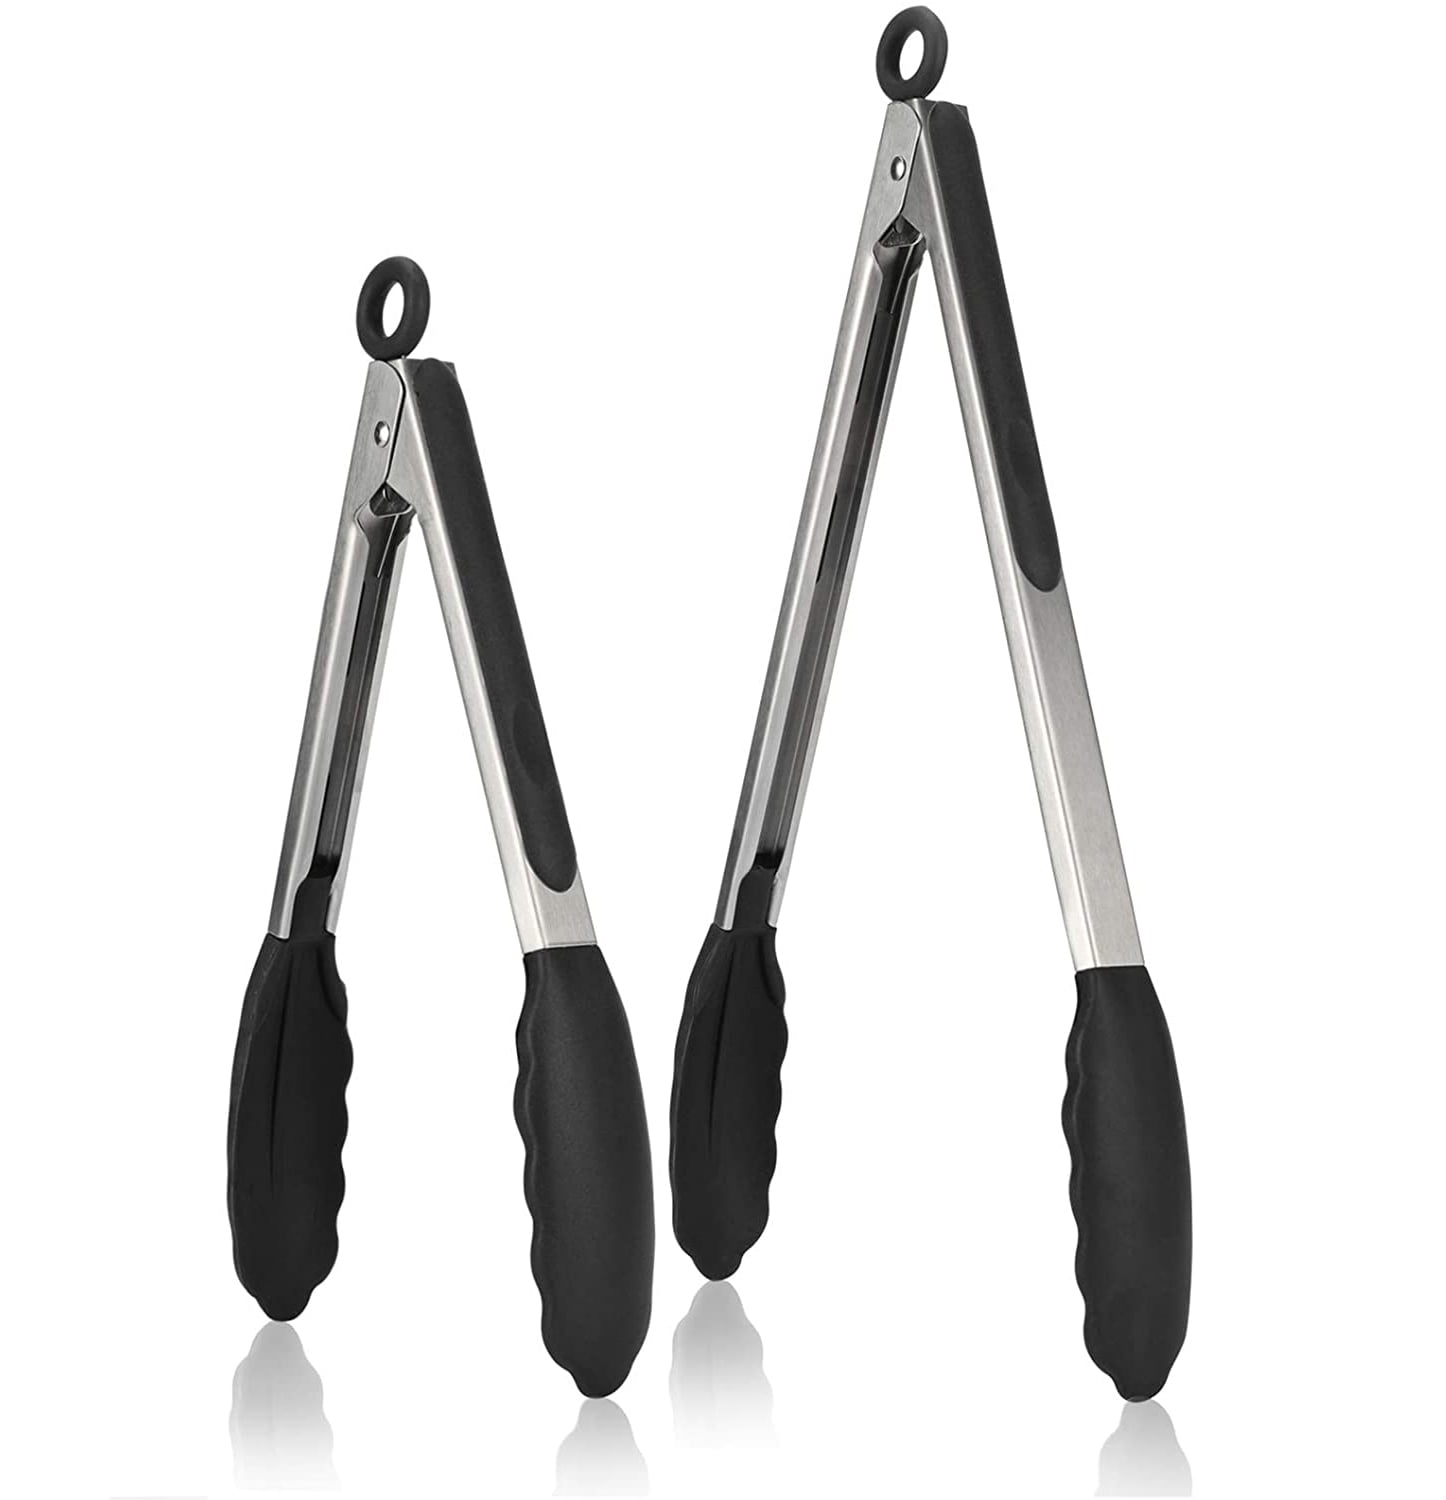 Gorilla Grip Stainless Steel Silicone Tongs for Cooking, 9 and 12